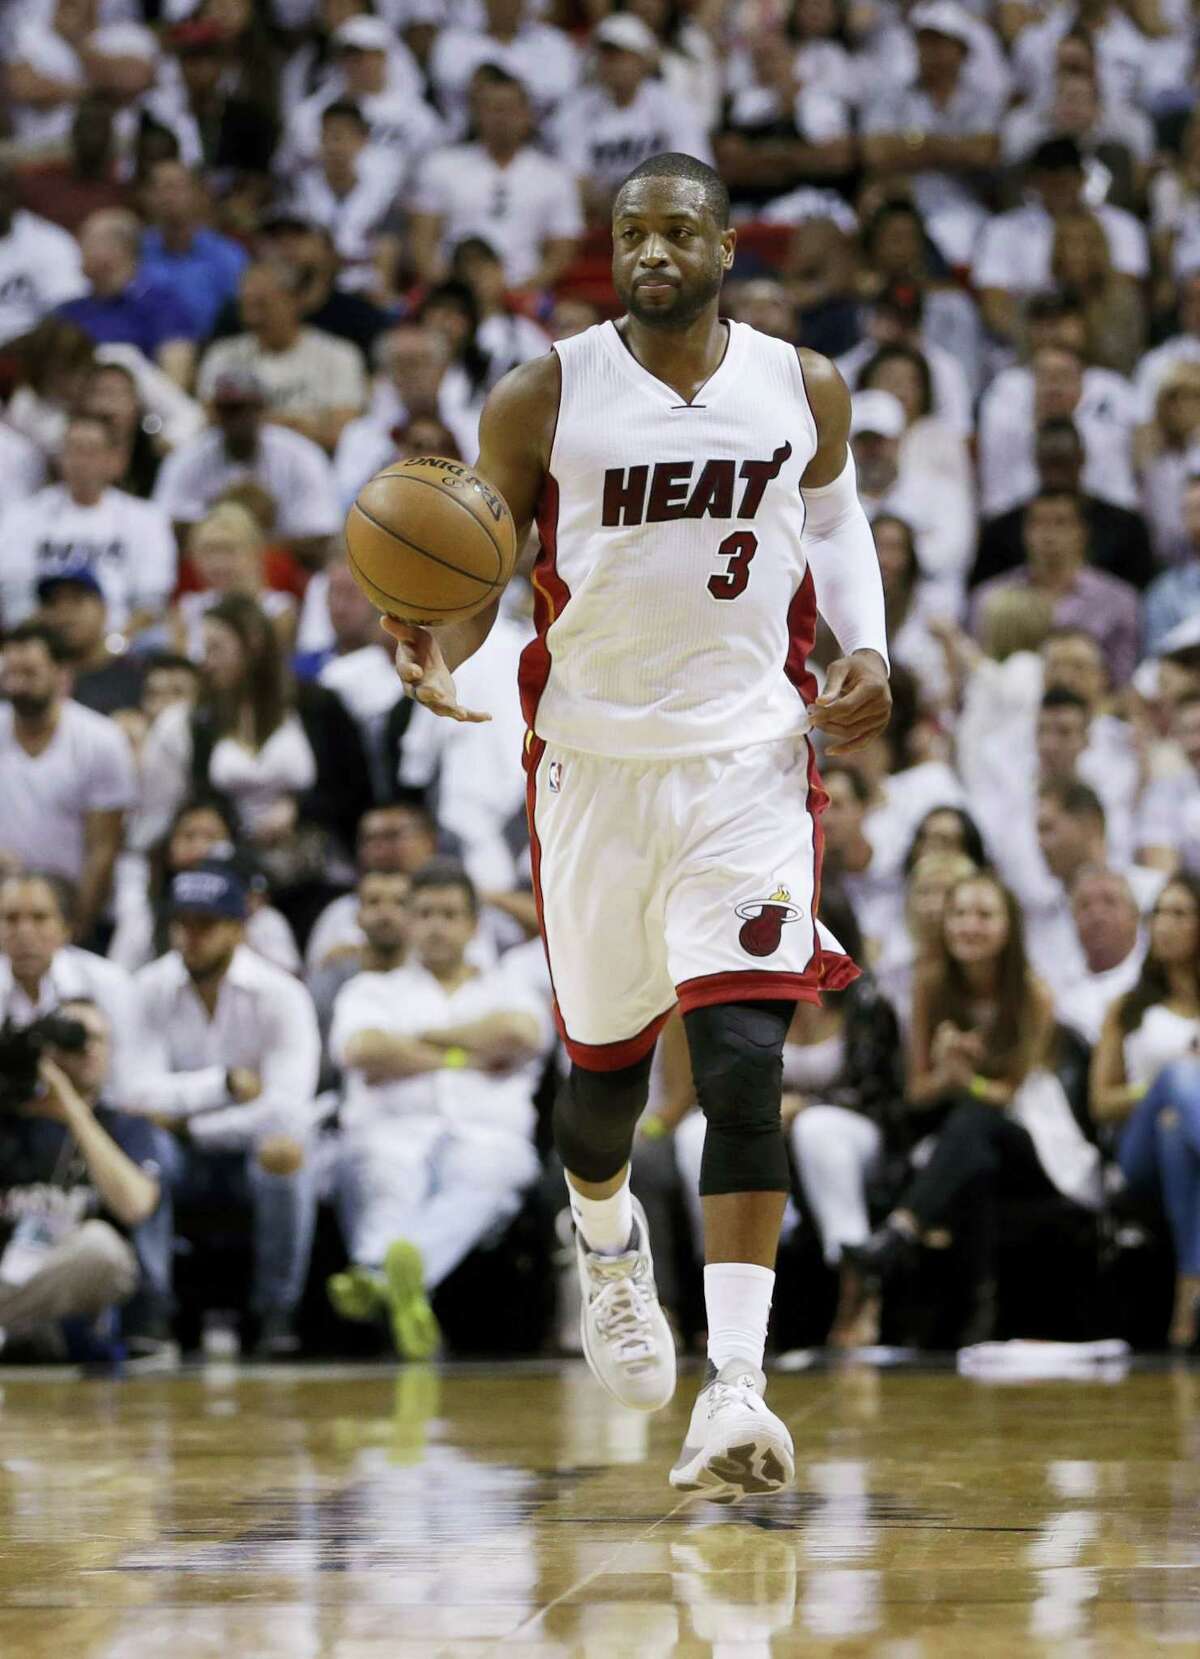 Miami Heat guard Dwyane Wade dribbles up the court during Game 3 against the Raptors on Saturday.